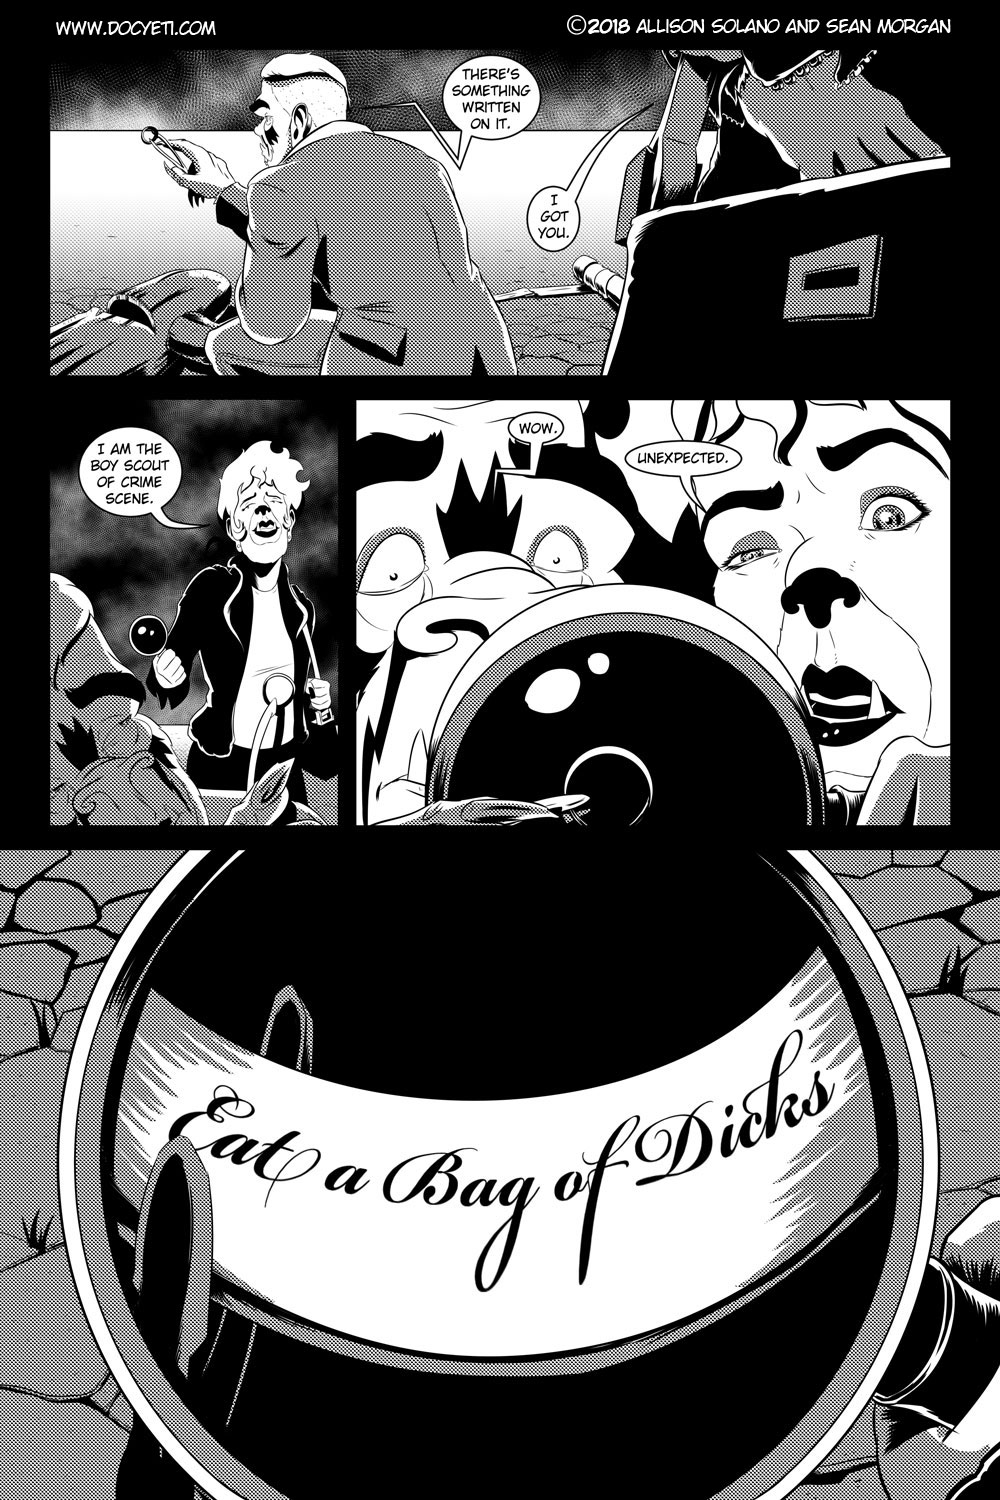 Flight of the Mothman! Issue 3 page 10